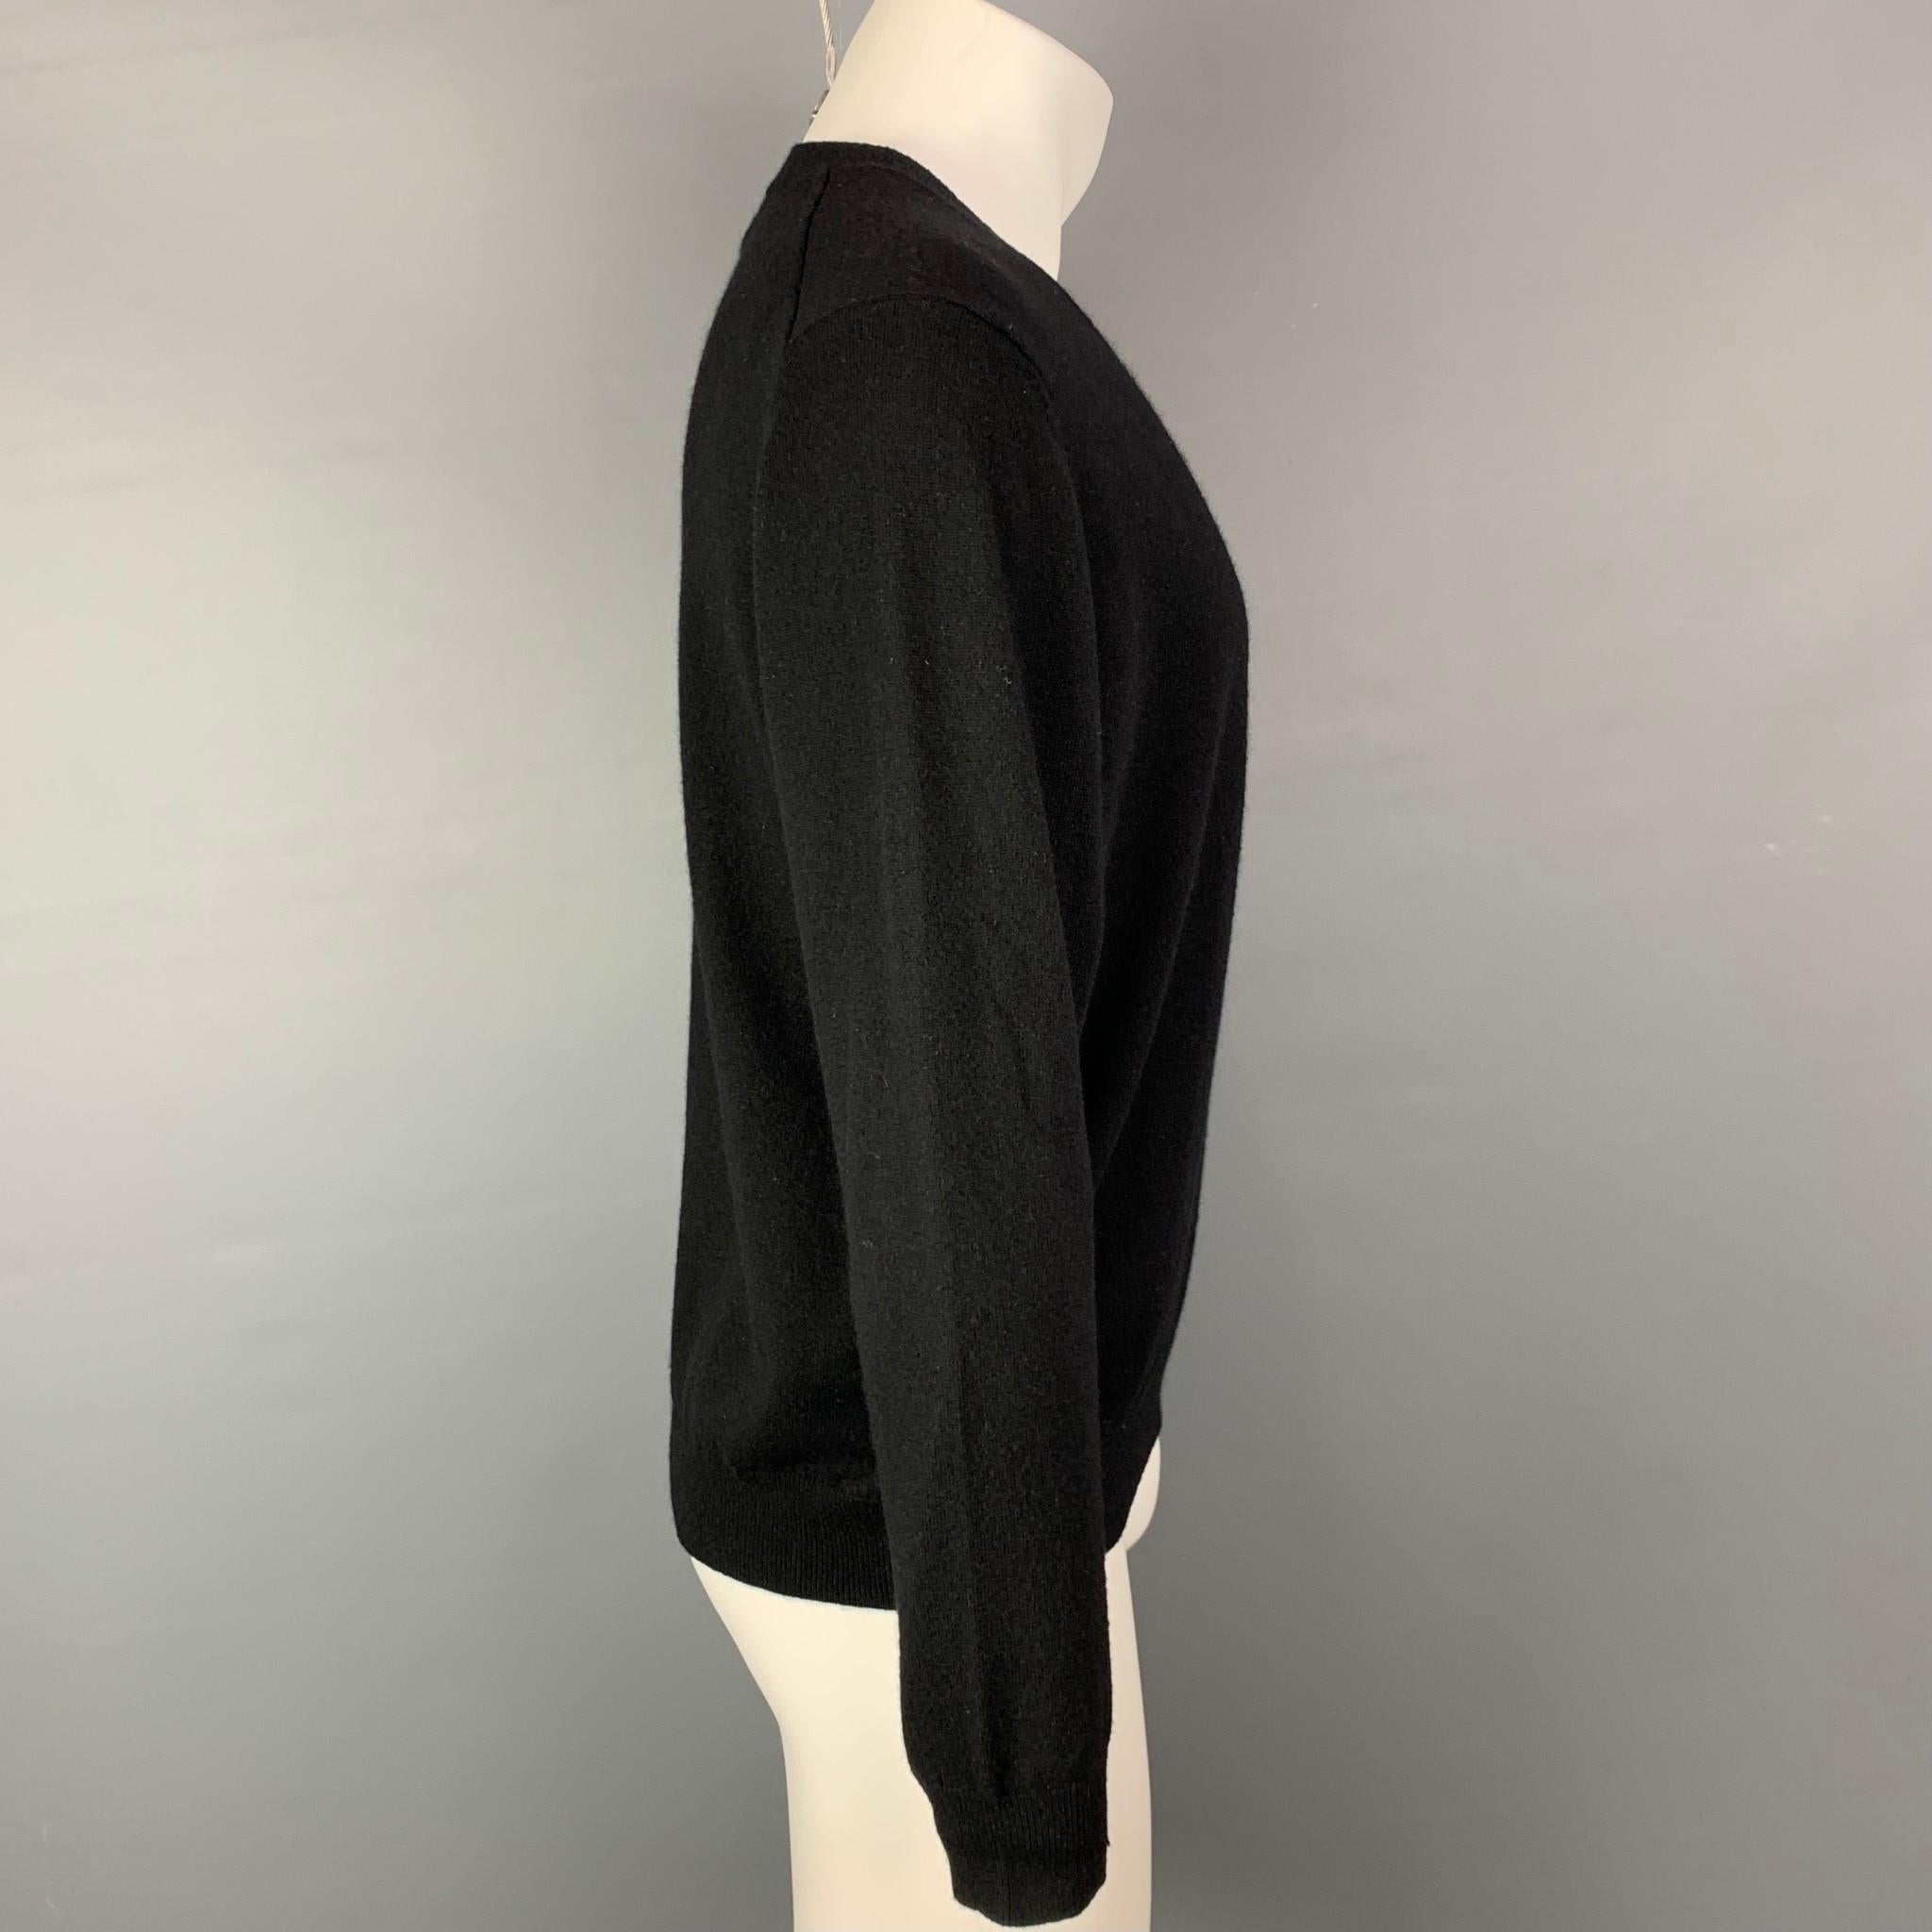 NEIMAN MARCUS pullover comes in a black knitted cashmere featuring a ribbed hem and a v-neck.

Very Good Pre-Owned Condition.
Marked: M

Measurements:

Shoulder: 19 in.
Chest: 42 in.
Sleeve: 25.5 in.
Length: 24 in. 